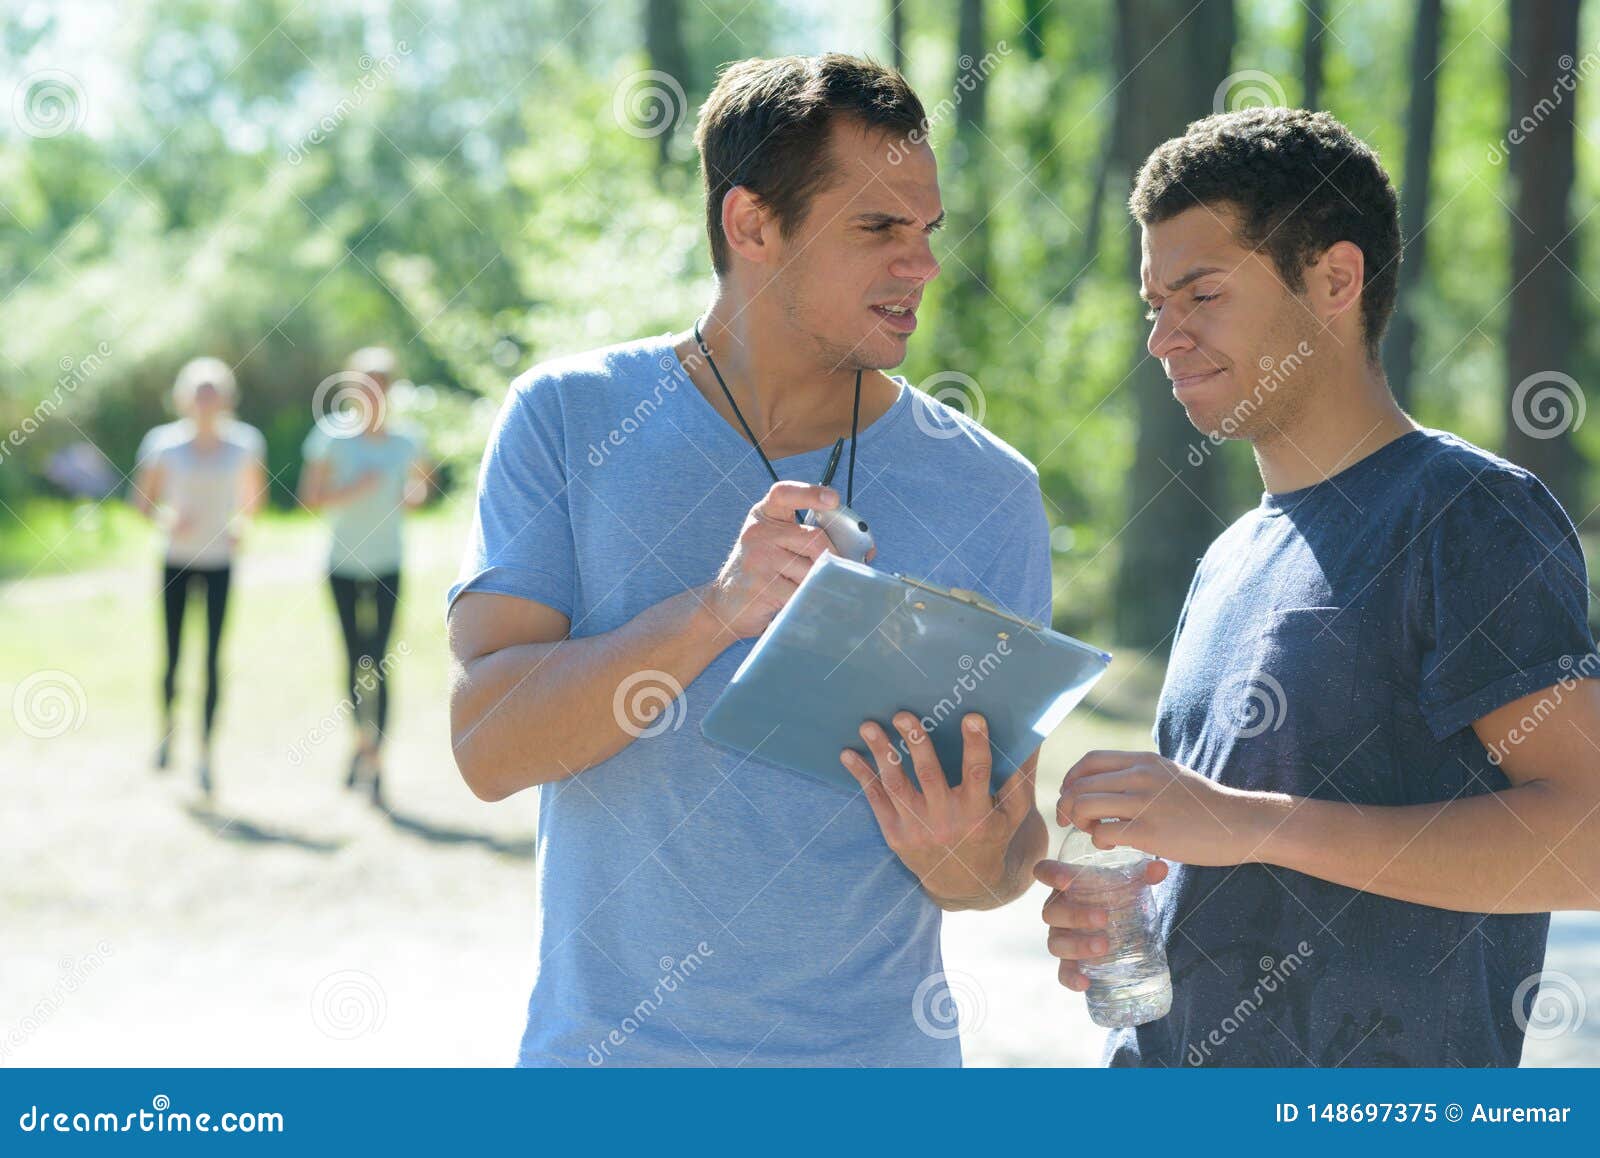 Running Coach Talking To Athlete Stock Image - Image of runner, exercise:  148697375